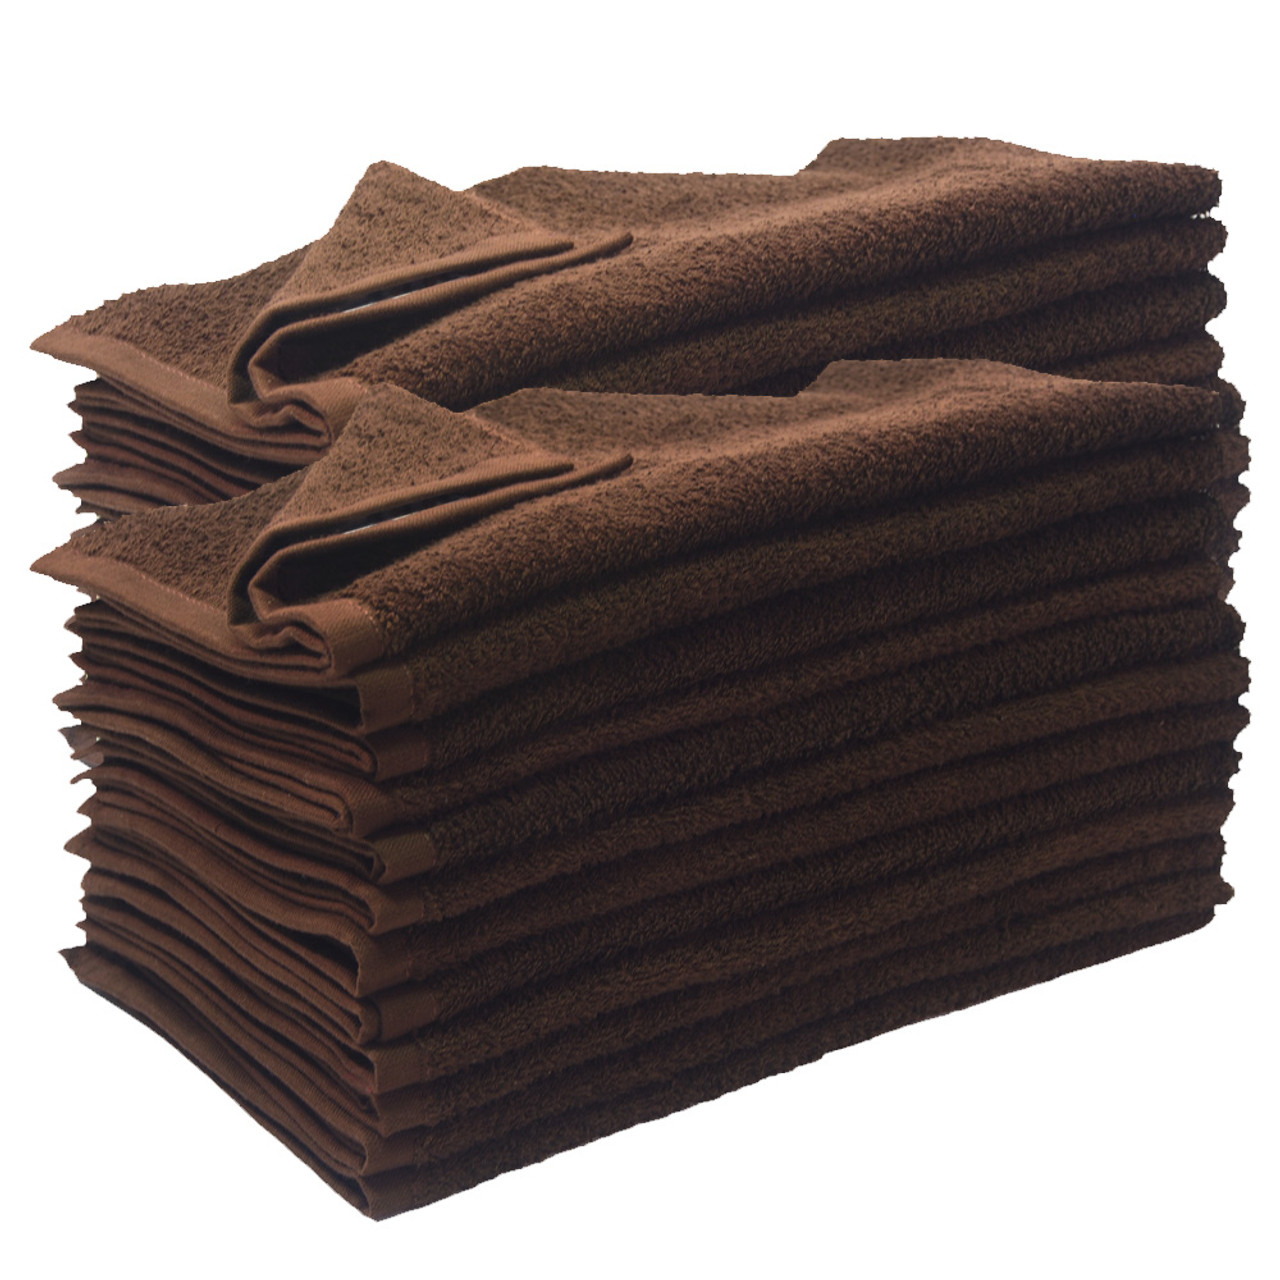 HY Supplies Inc satisfies the demands of Bleach Safe Salon Towels!! -  IssueWire